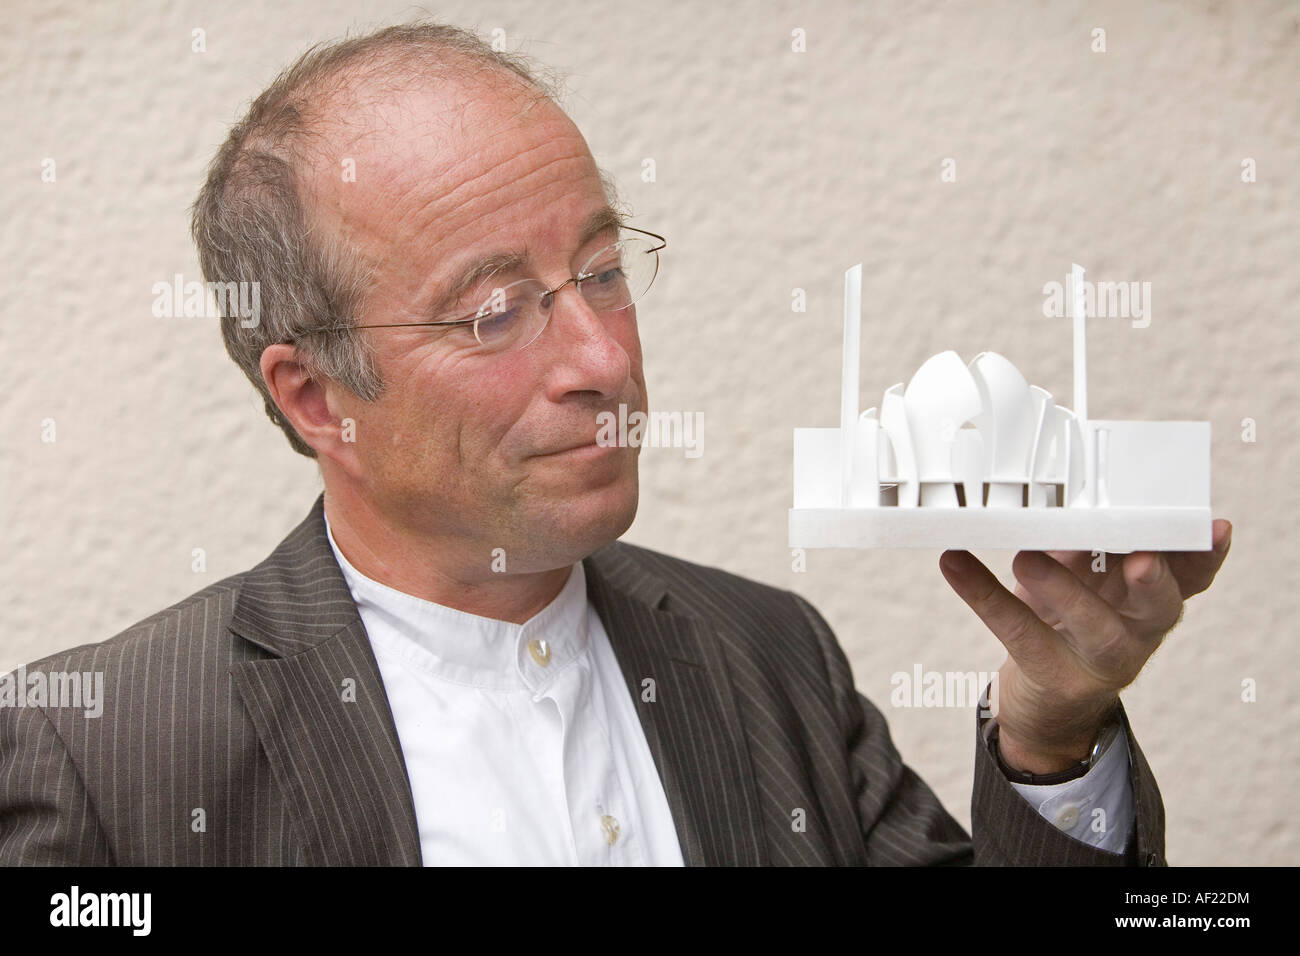 Paul Boehm, architect of the new central mosque in Cologene, Germany Stock Photo